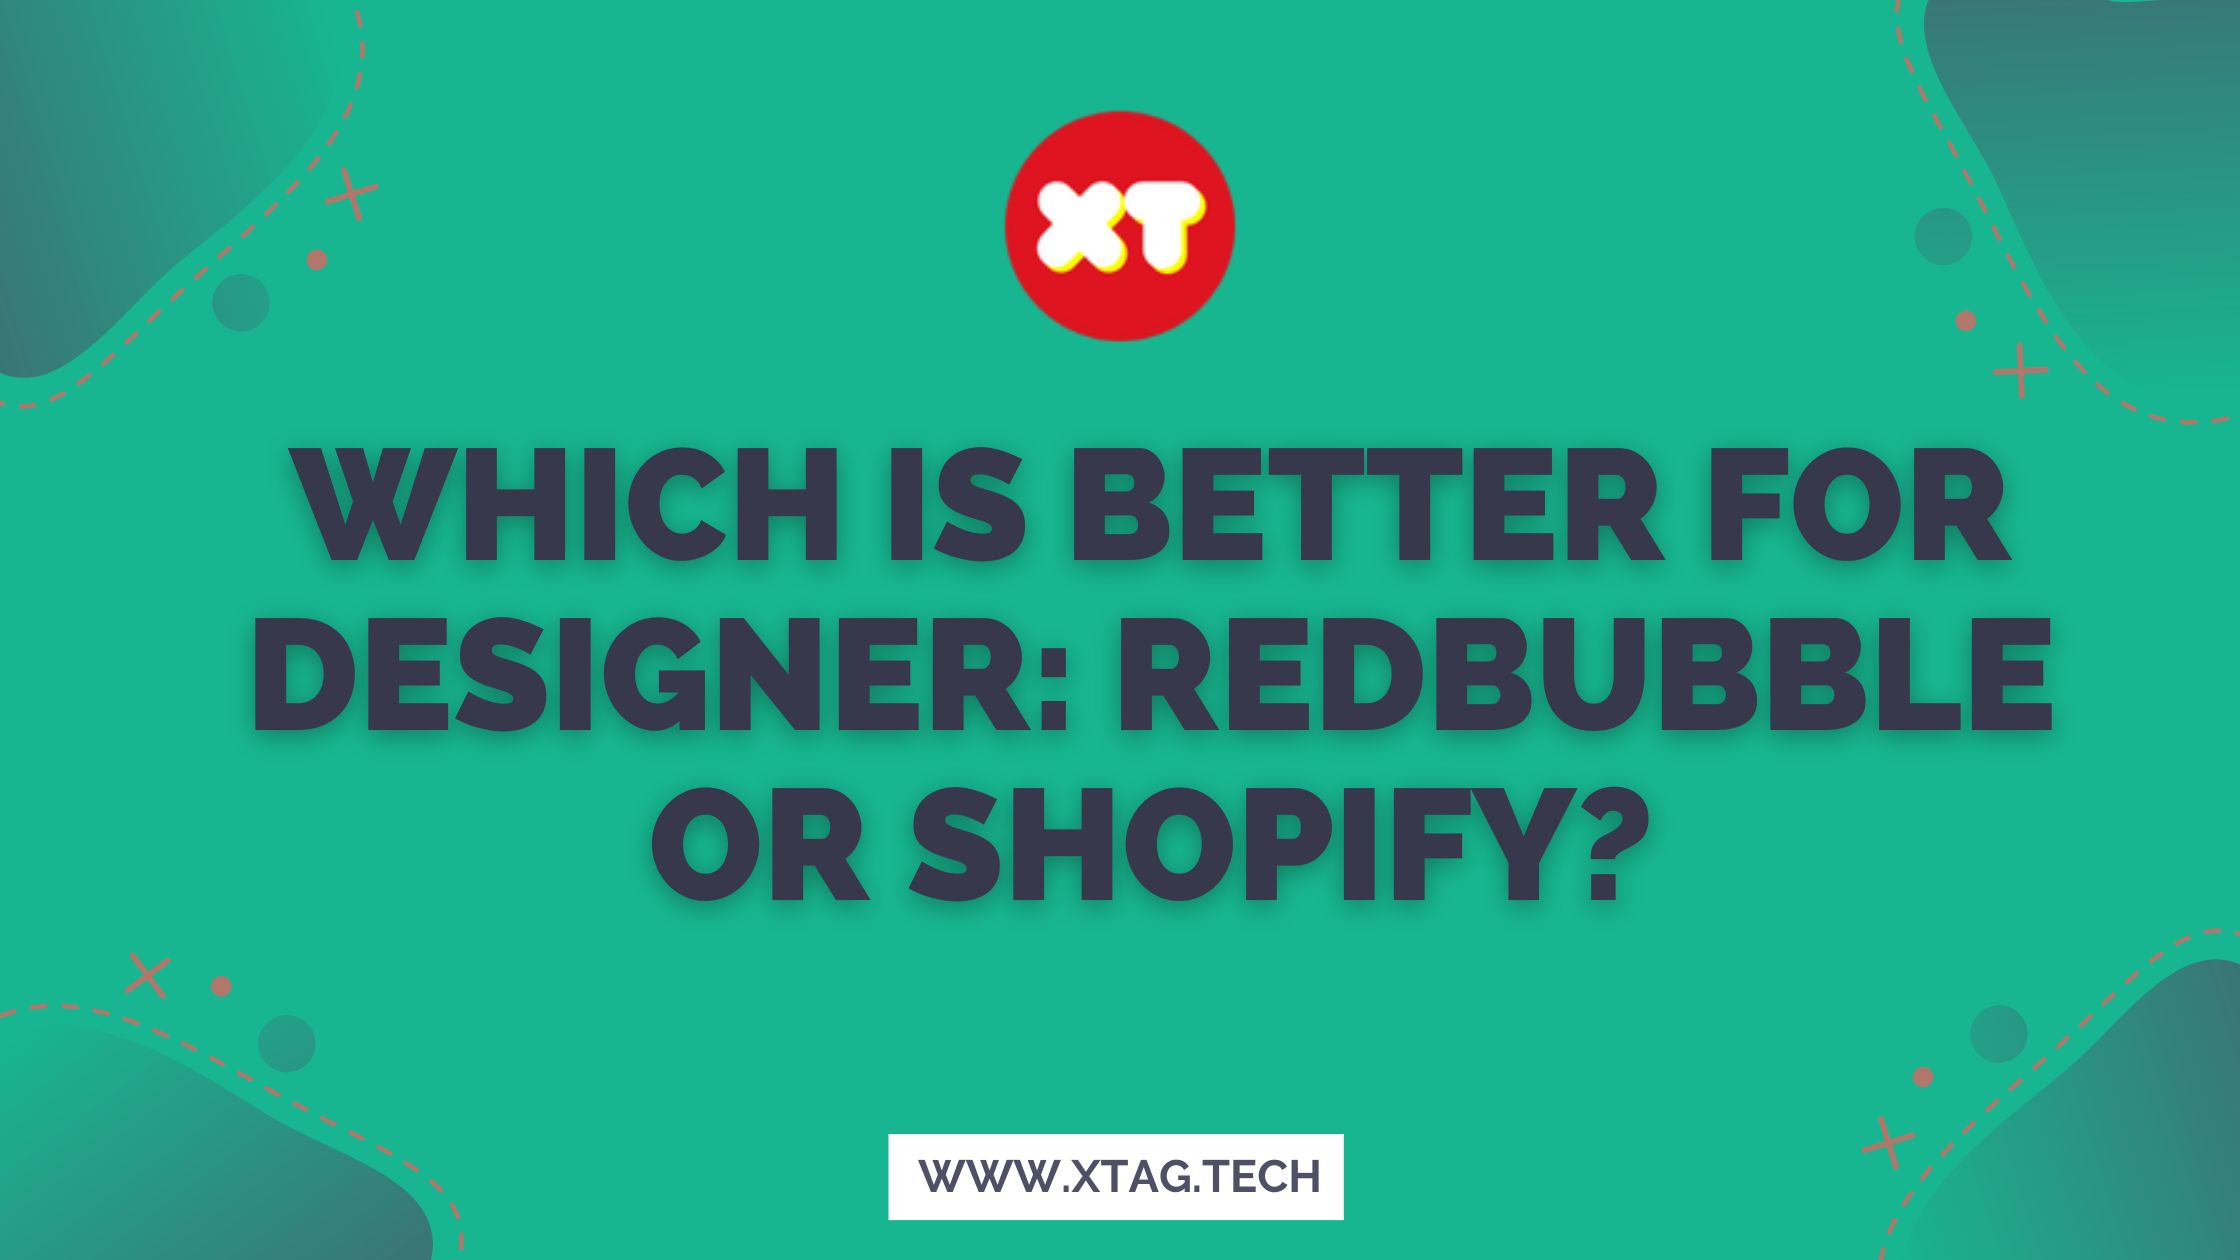 Which Is Better For Designer: Redbubble Or Shopify?